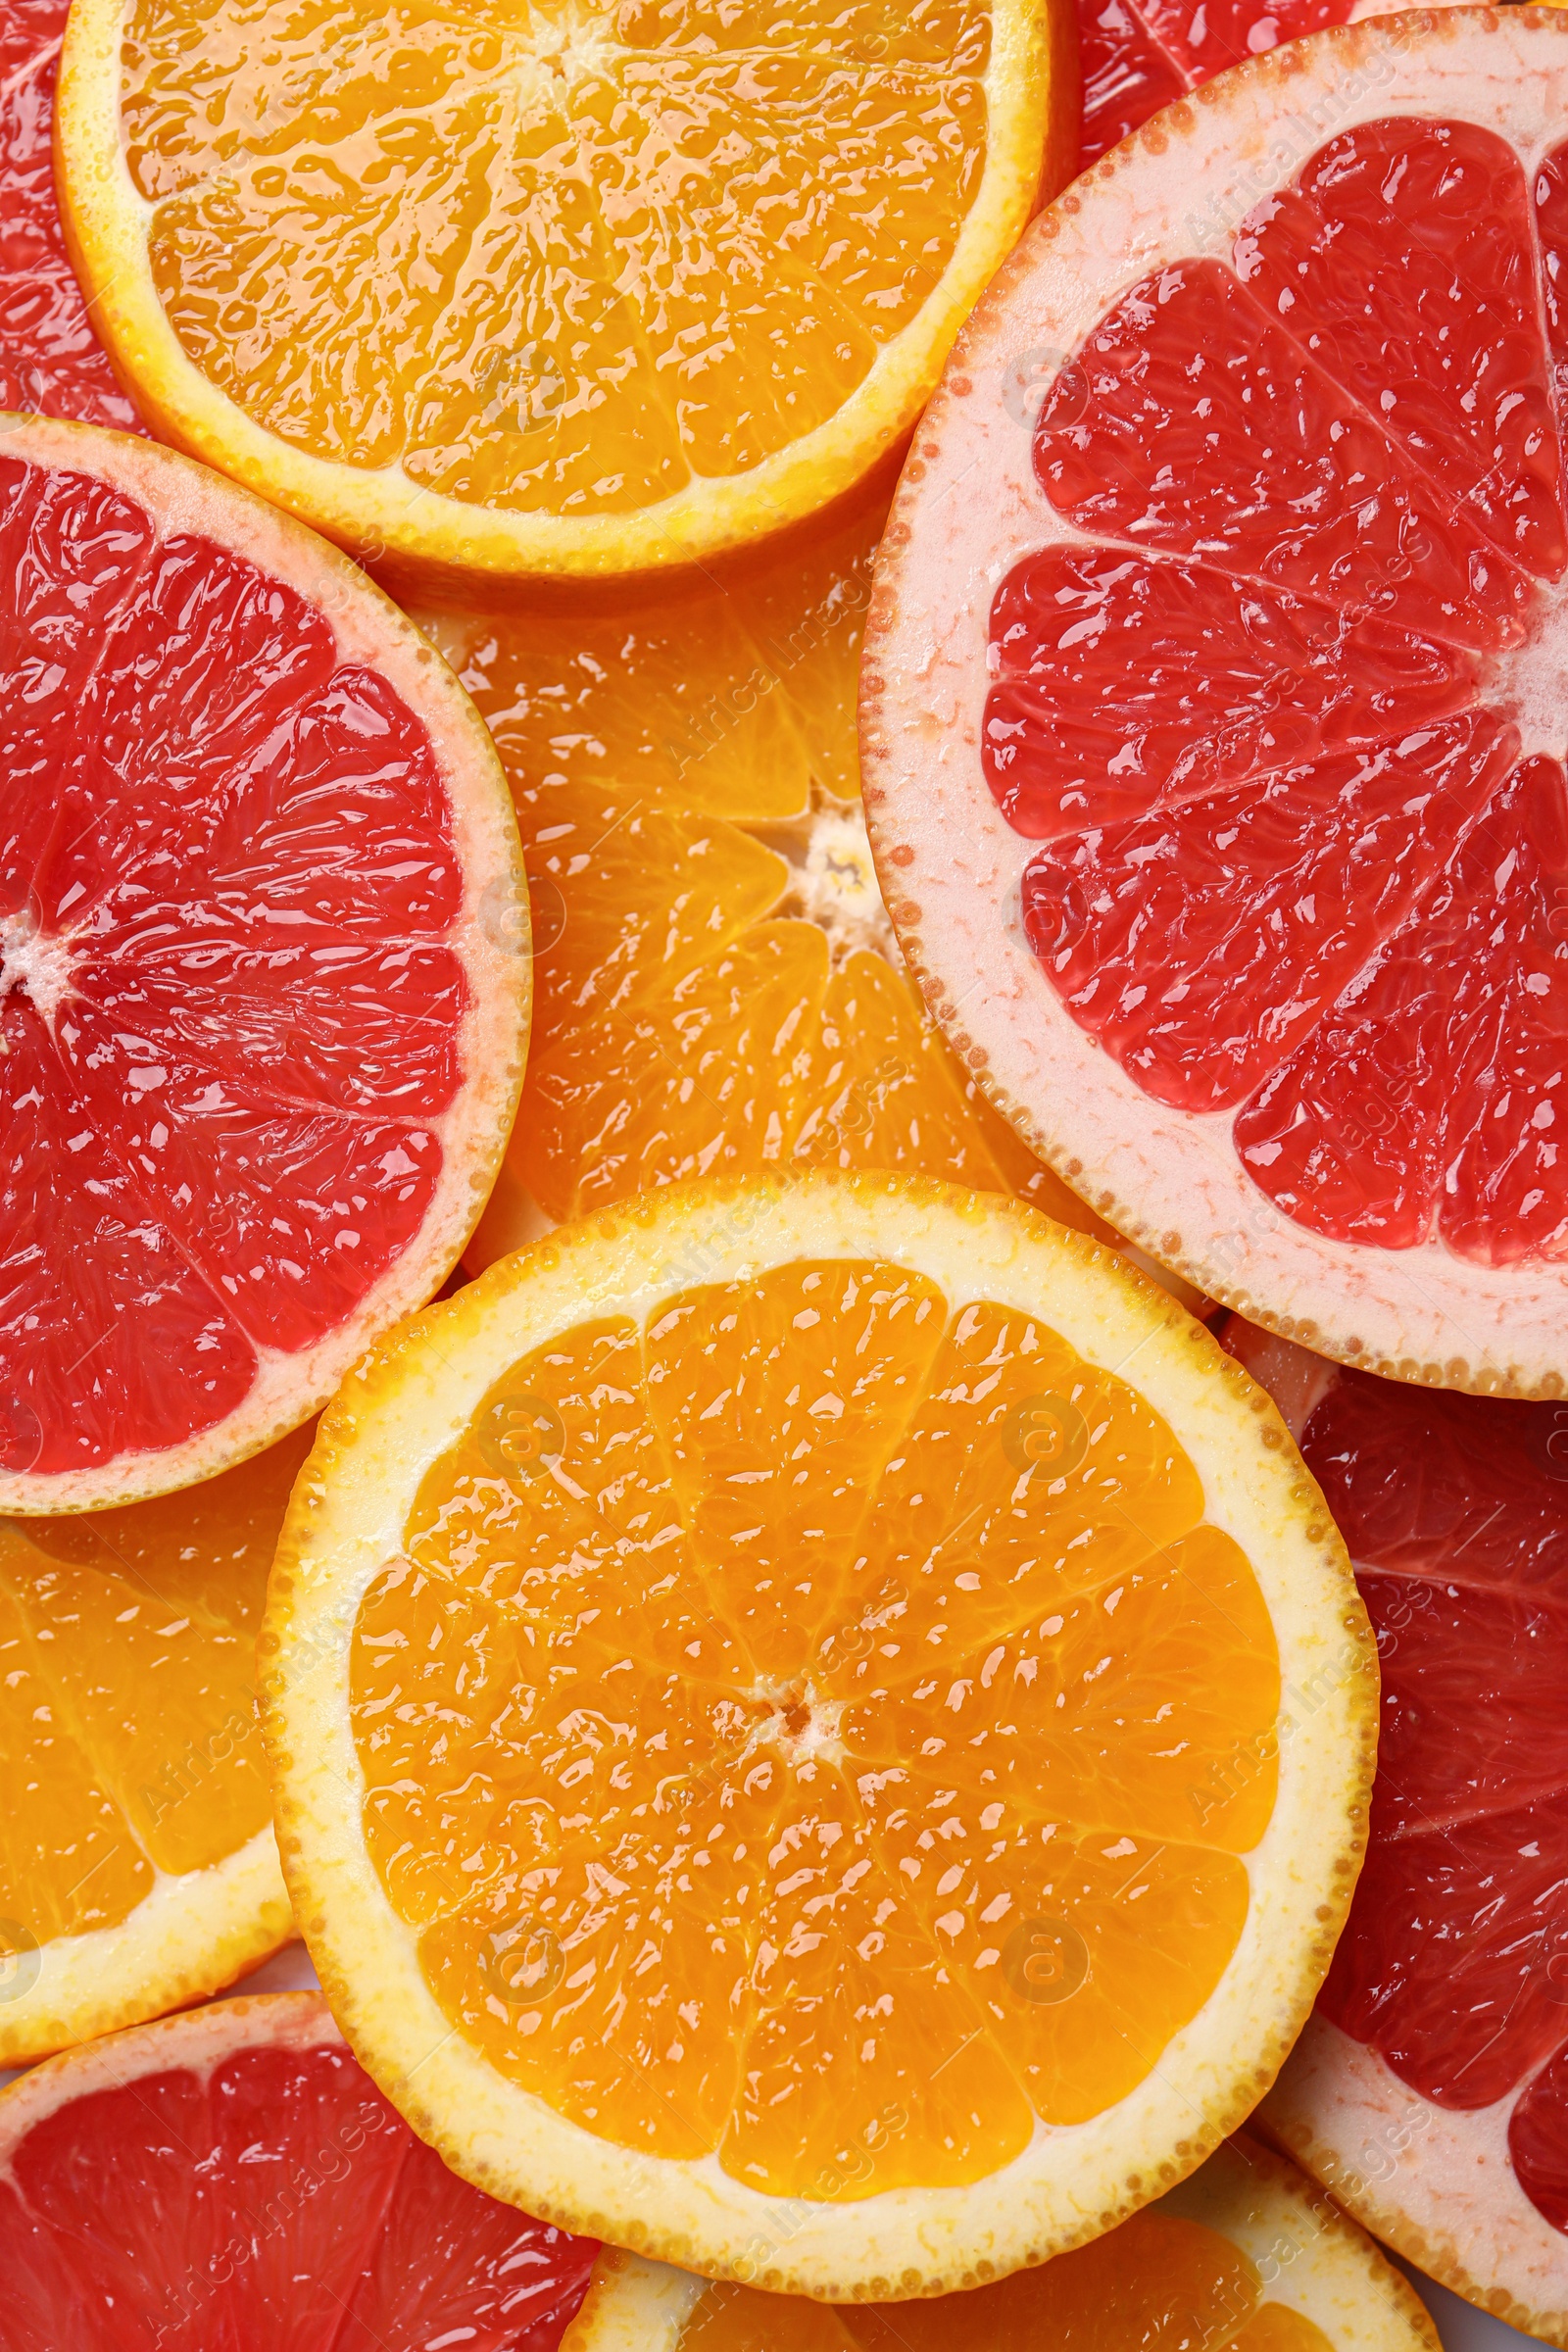 Photo of Slices of grapefruit and orange as background, top view